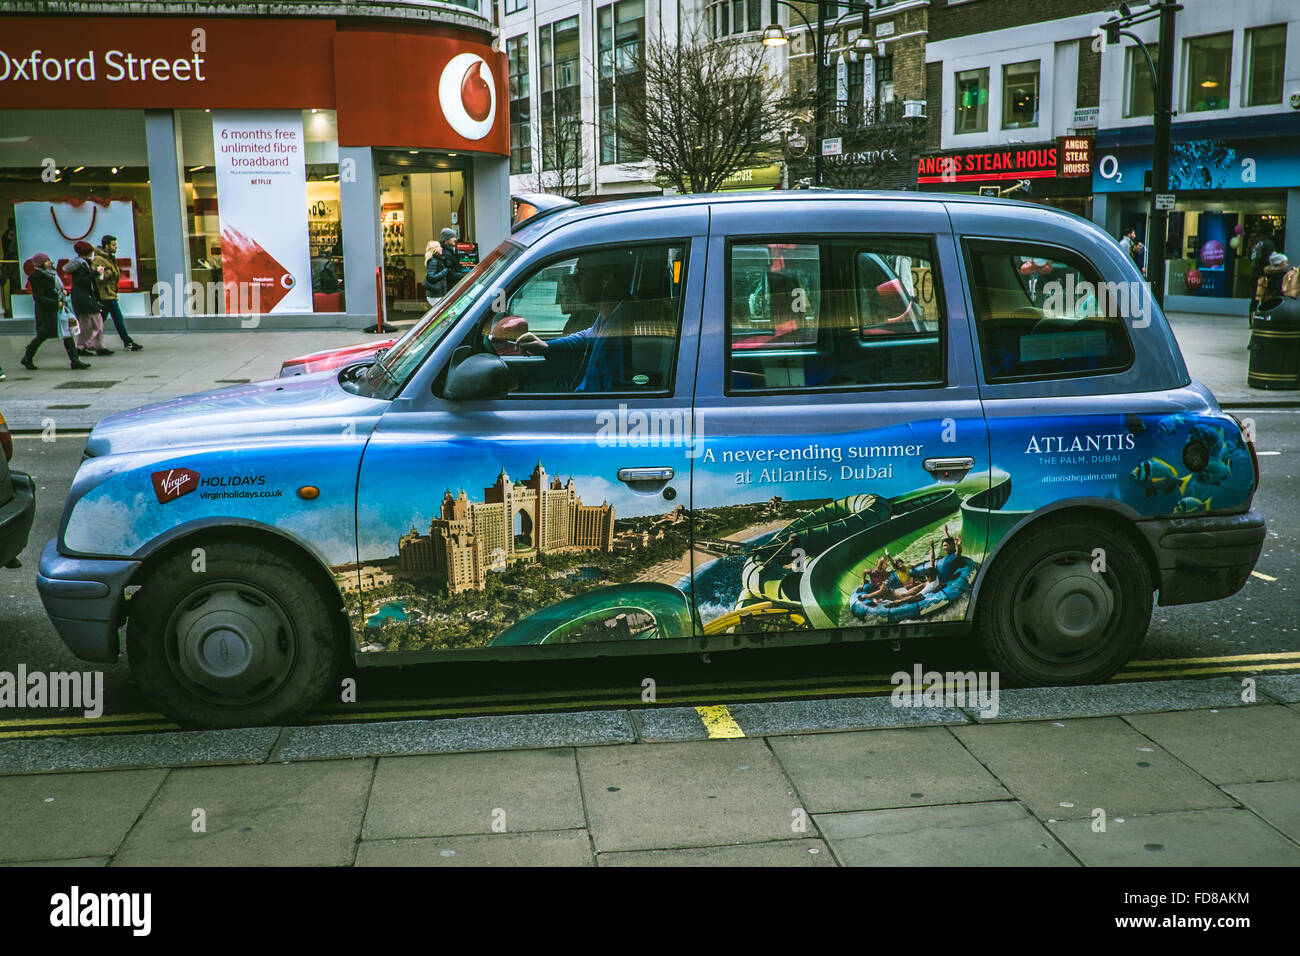 London Taxi Cab in Oxford Street Stock Photo